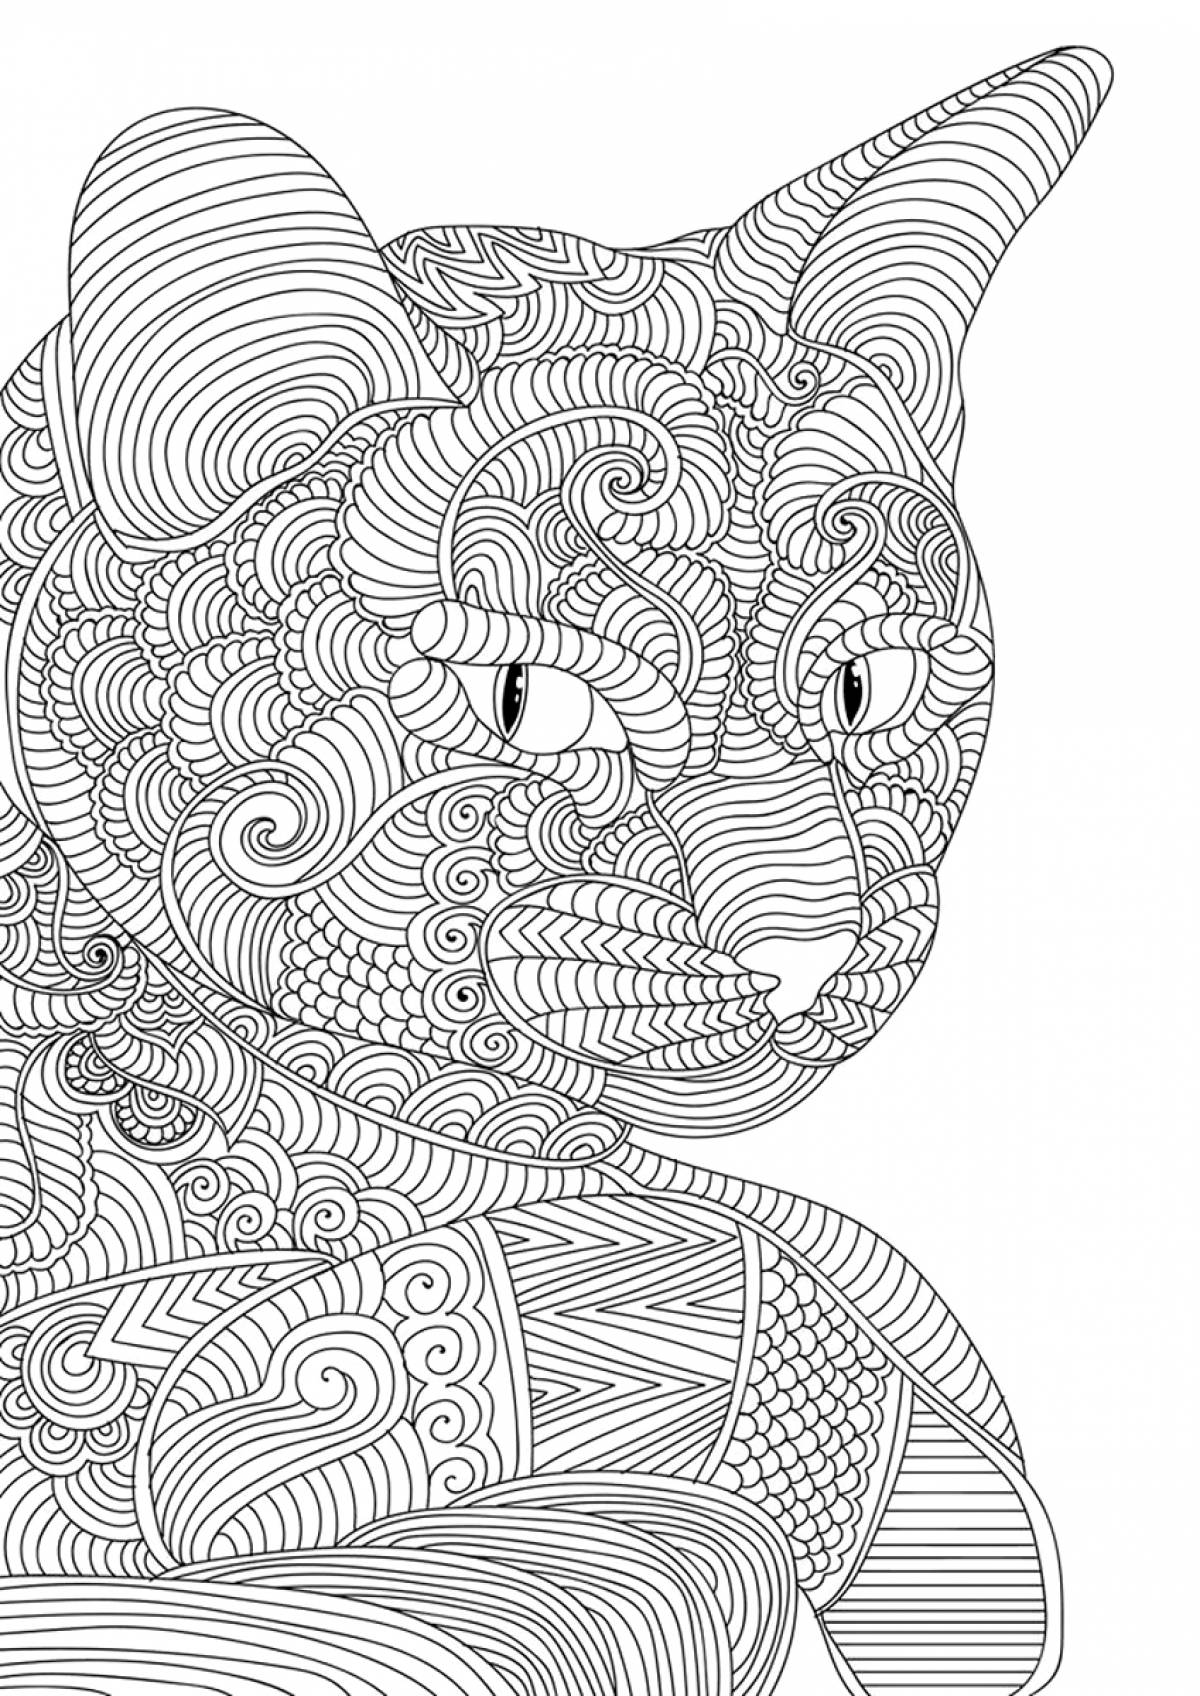 Coloring book complex of poetic anti-stress animals